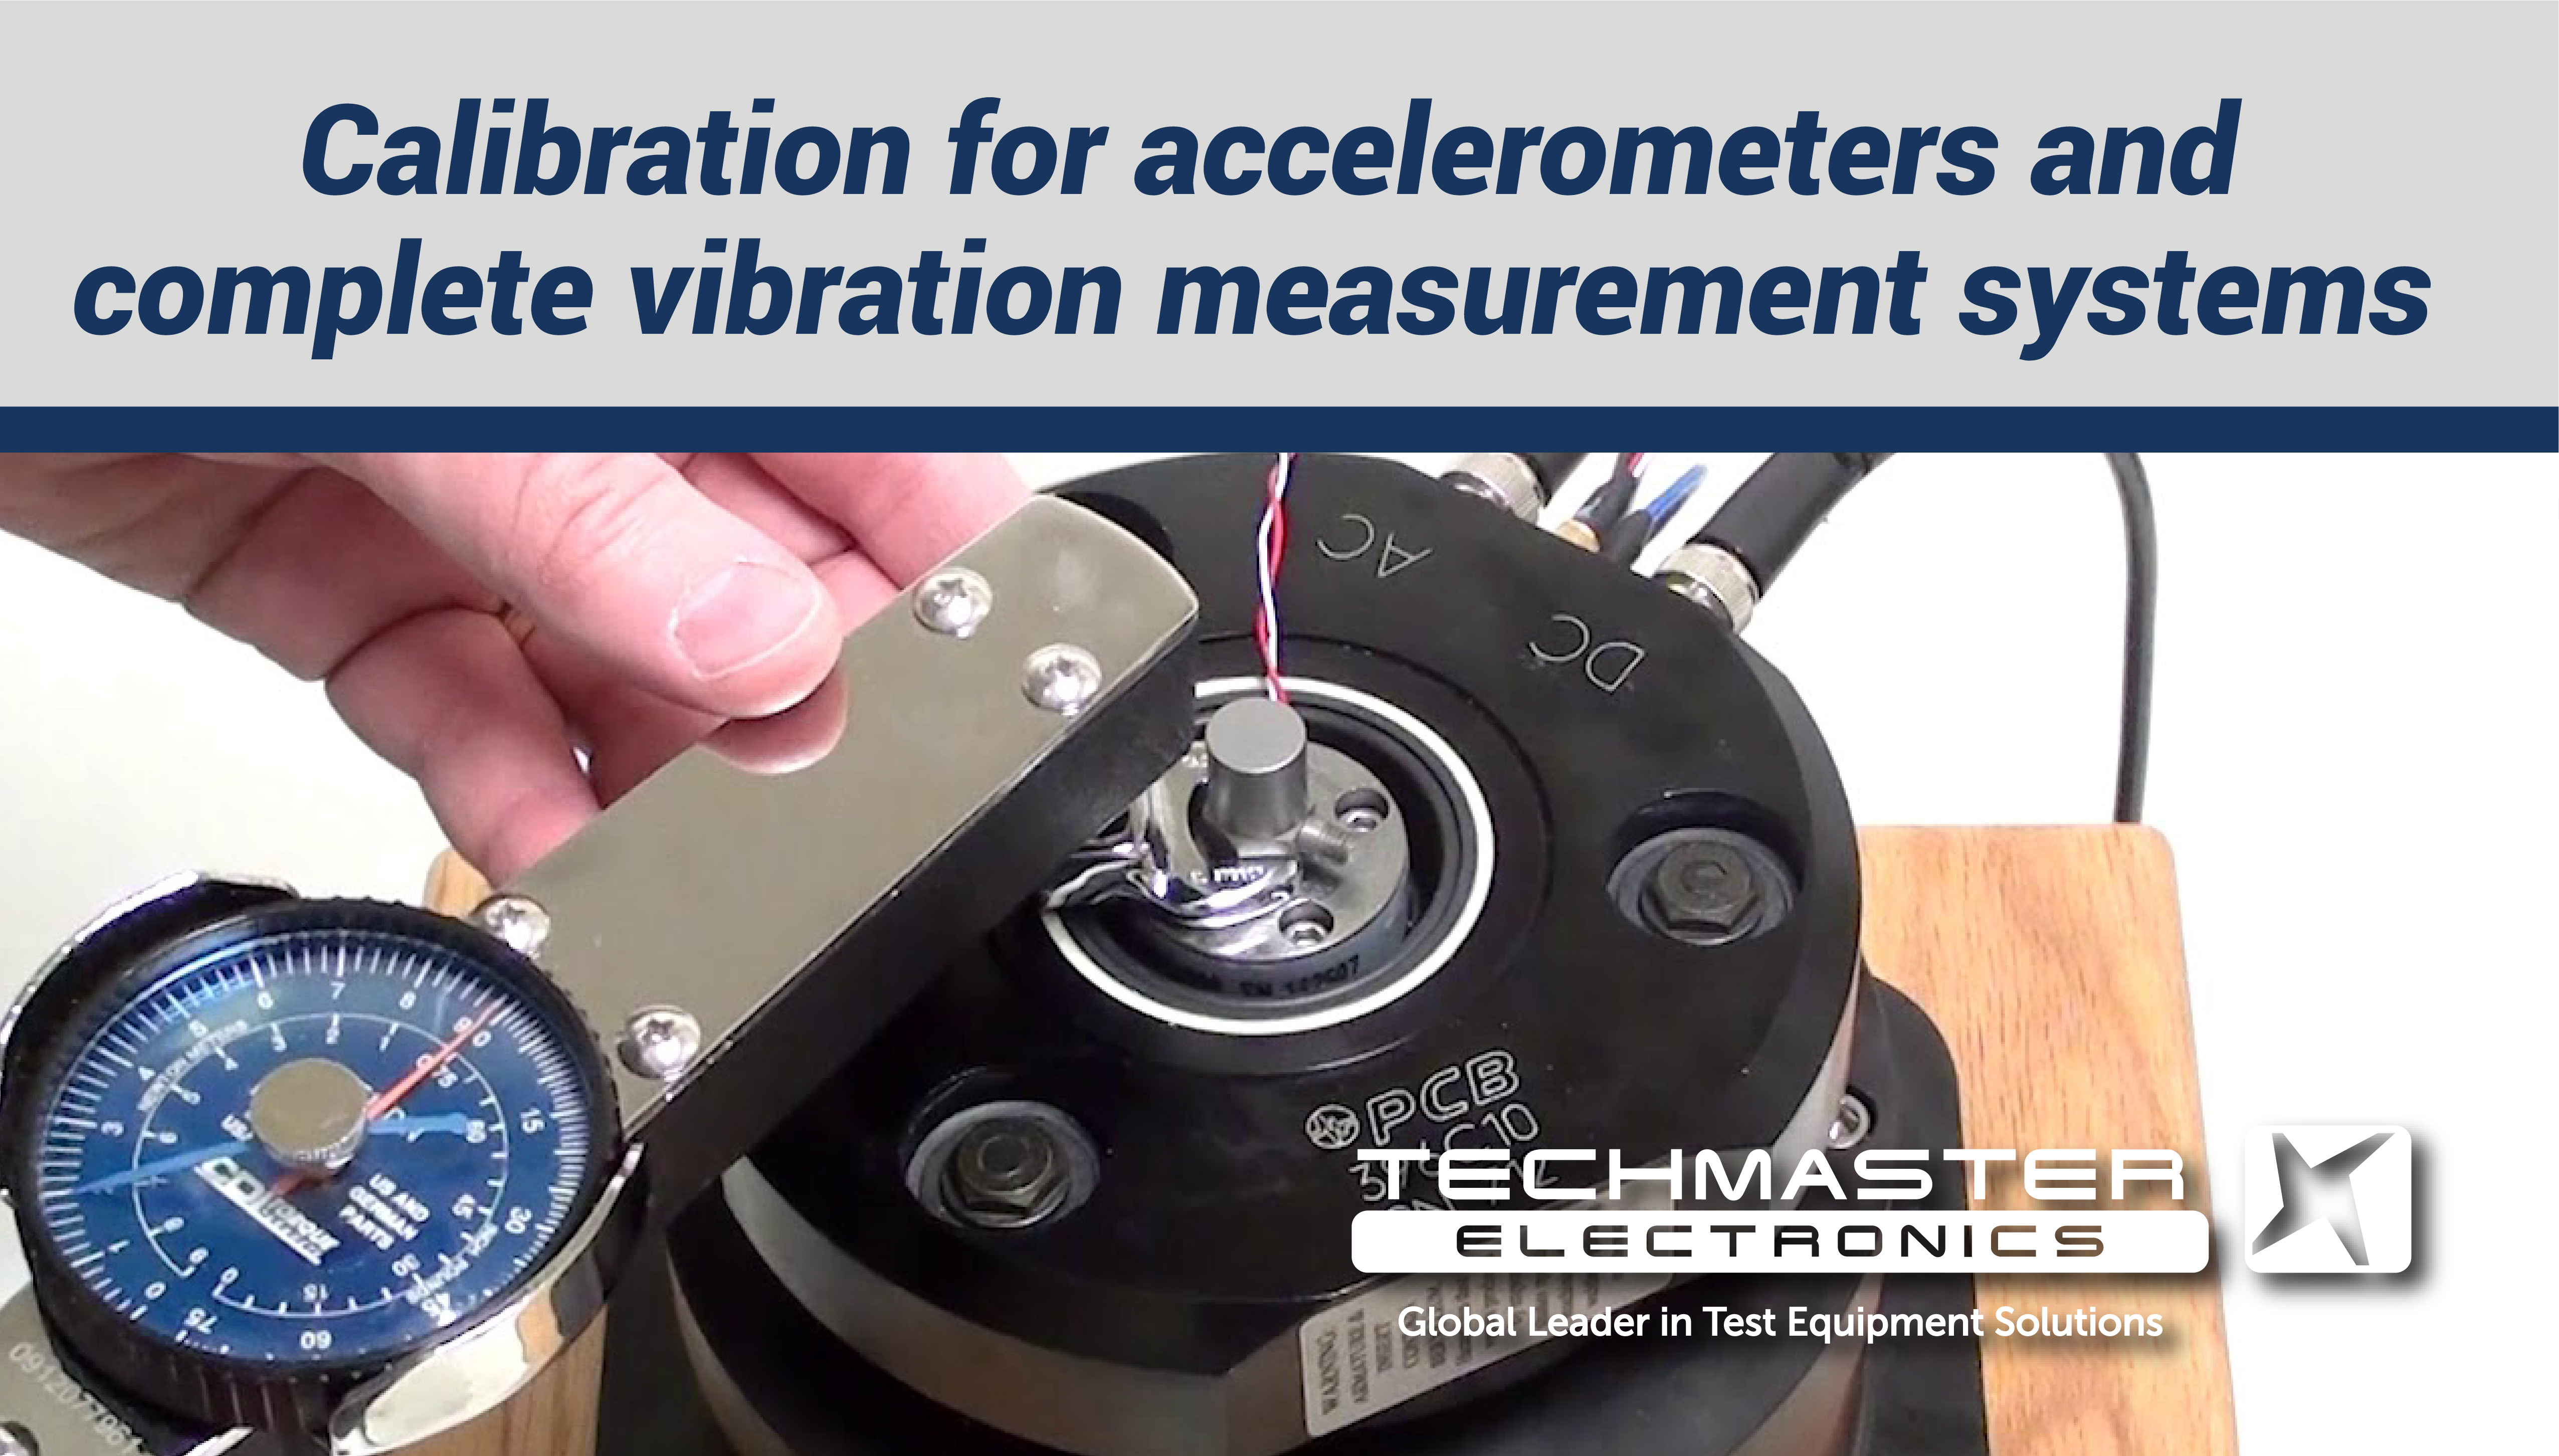 Calibration for accelerometers and vibration measurement systems